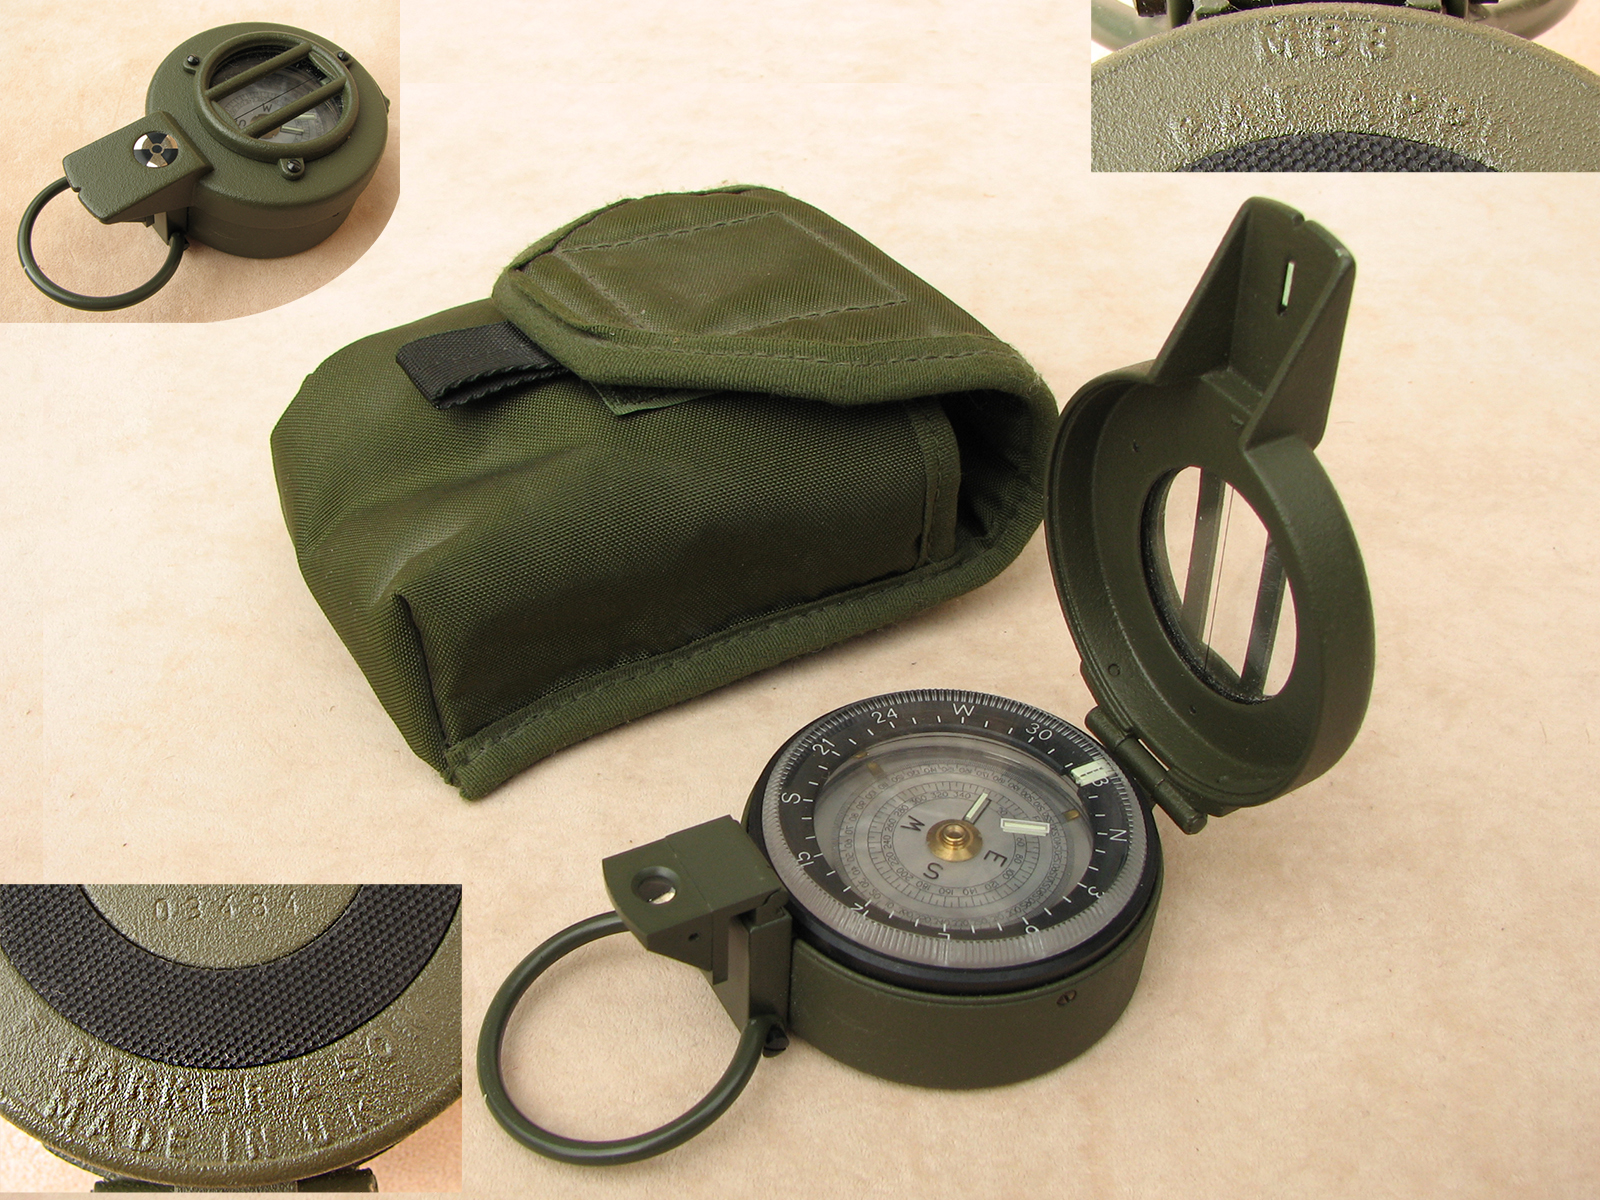 Francis Barker M-88 degrees version prismatic compass with pouch